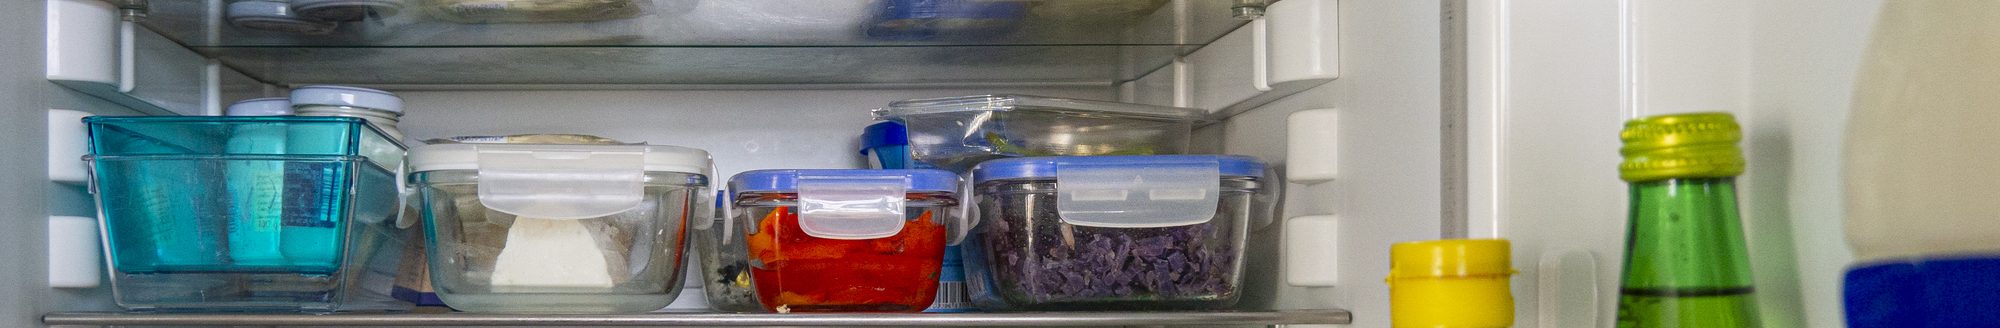 Open fridge with food leftovers and meal plan in glass containers. Domestic refrigerator for healthy eating. Leftover food, yogurt, cheese and other groceries. (Photo: iStock - Olga PS)